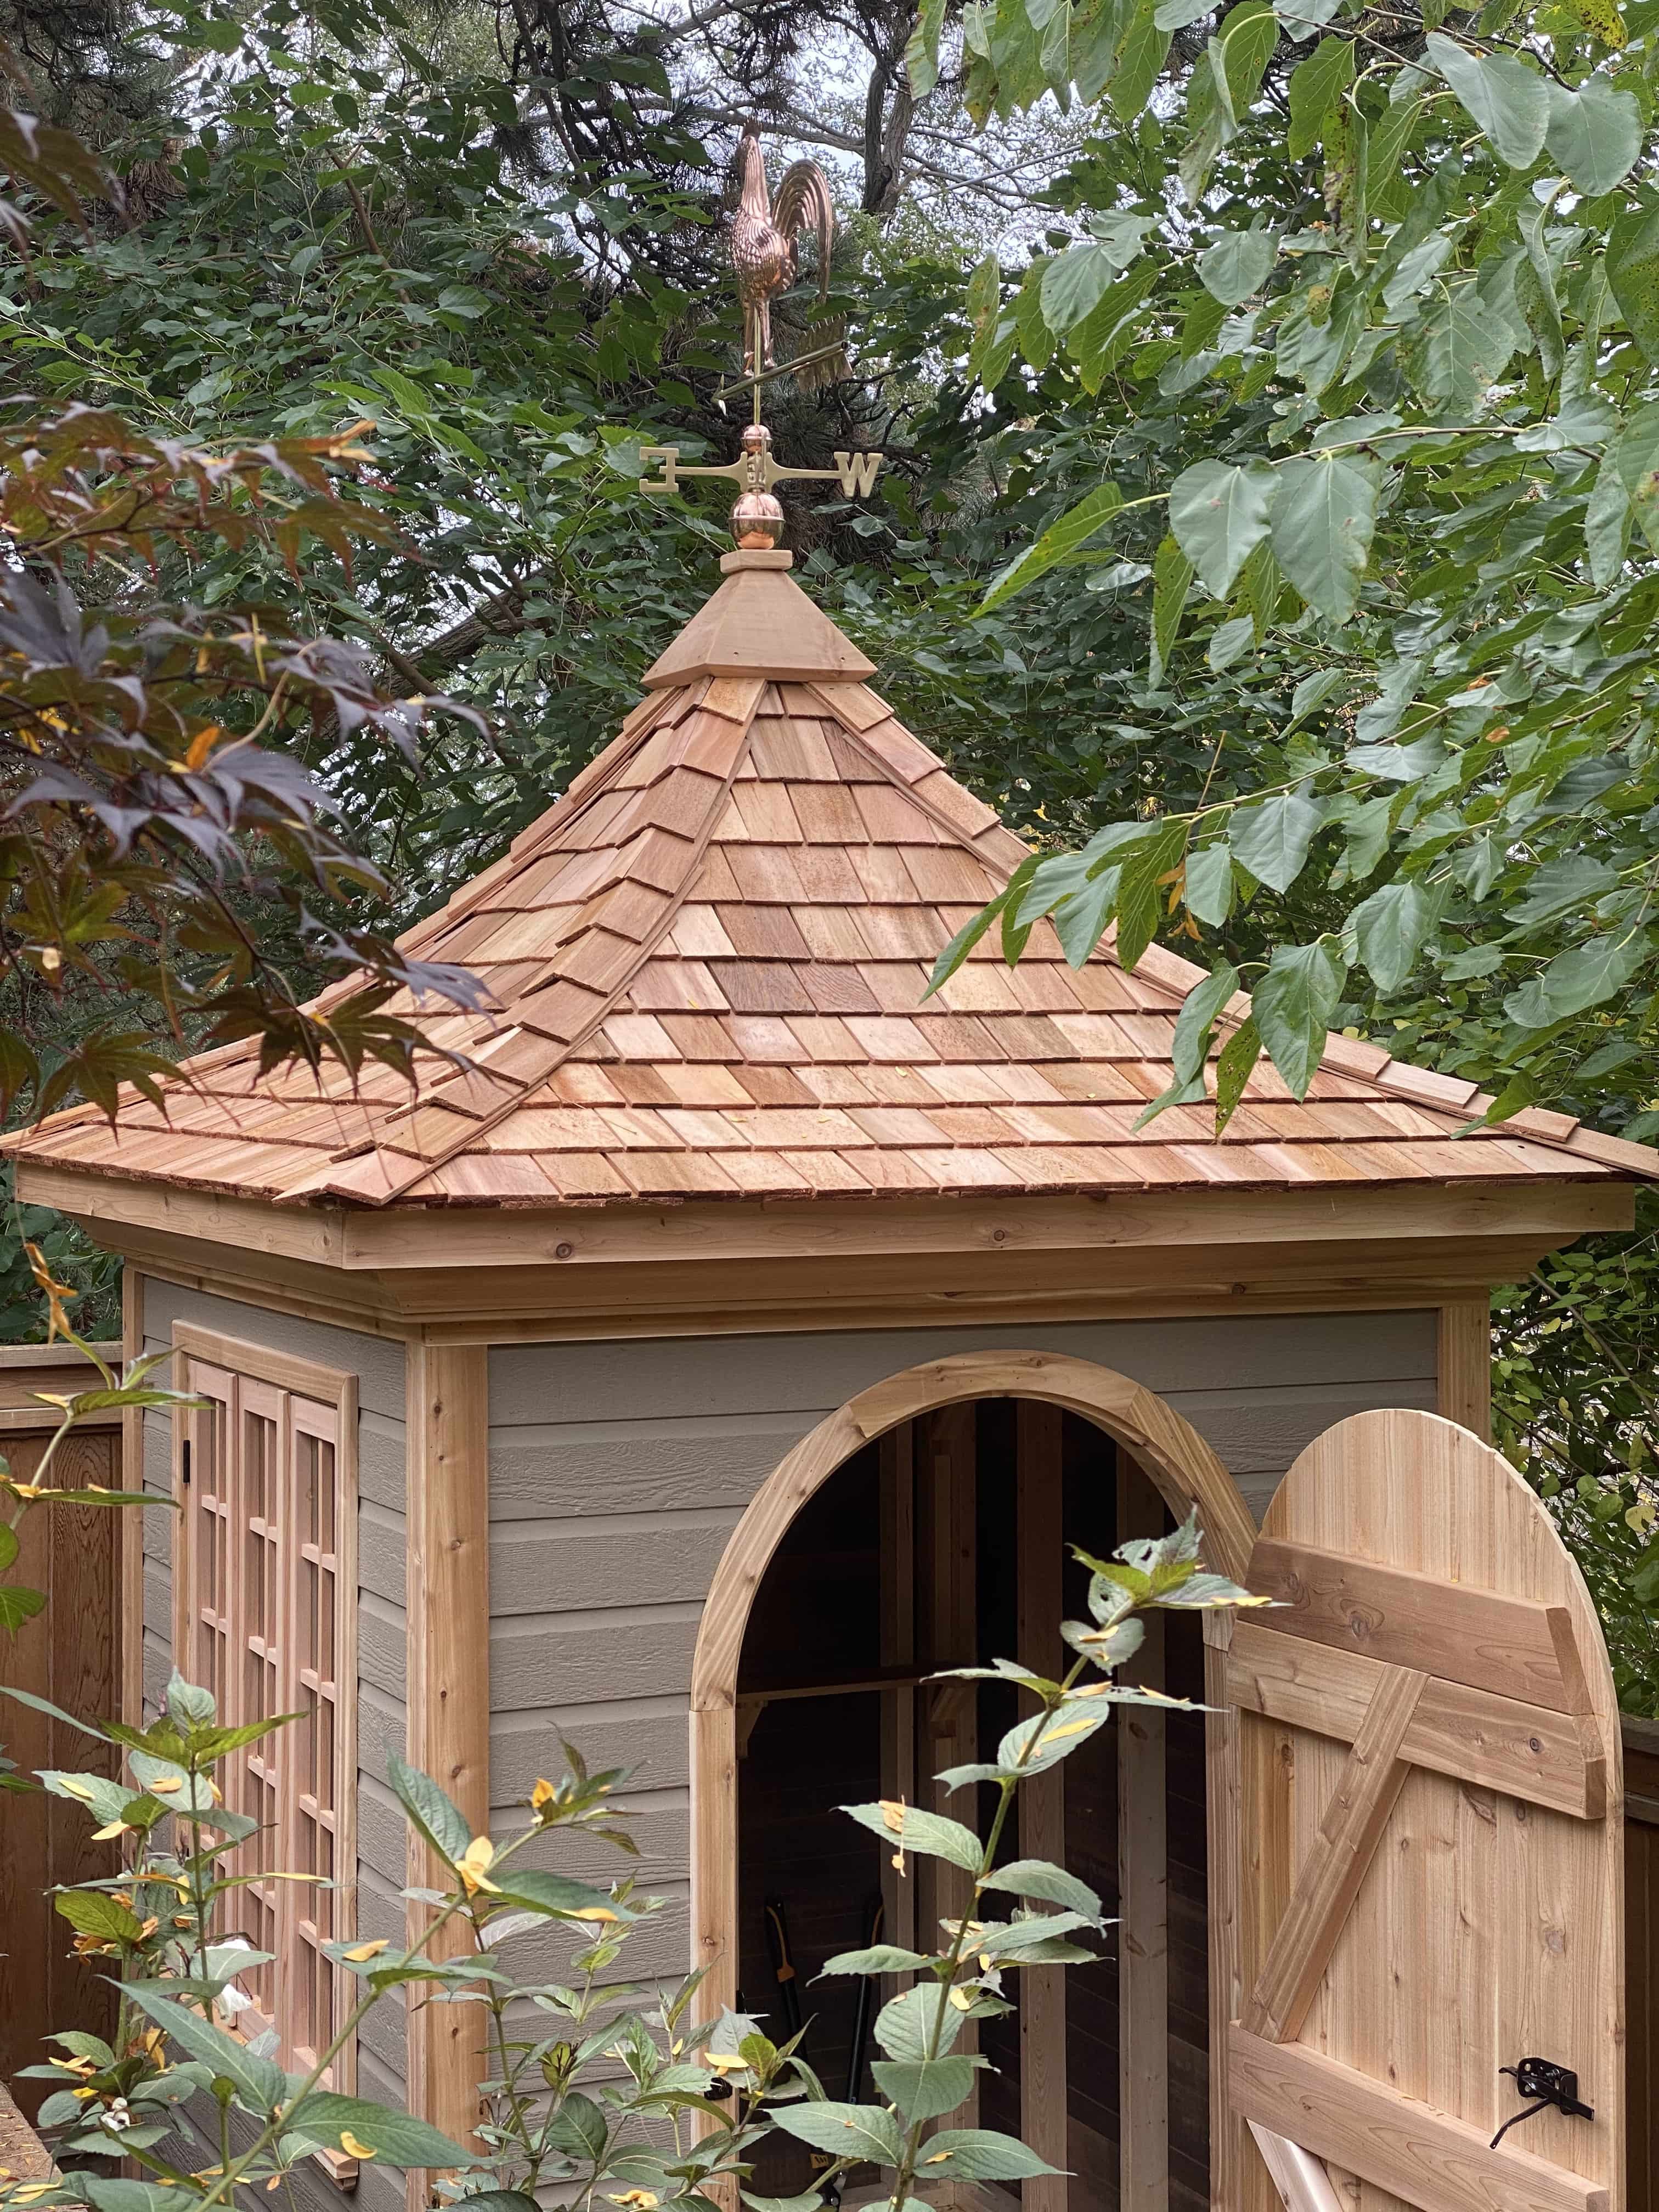 Front view of 6’ x 6' Melbourne Garden Shed located in Toronto, Ontario – Summerwood Products